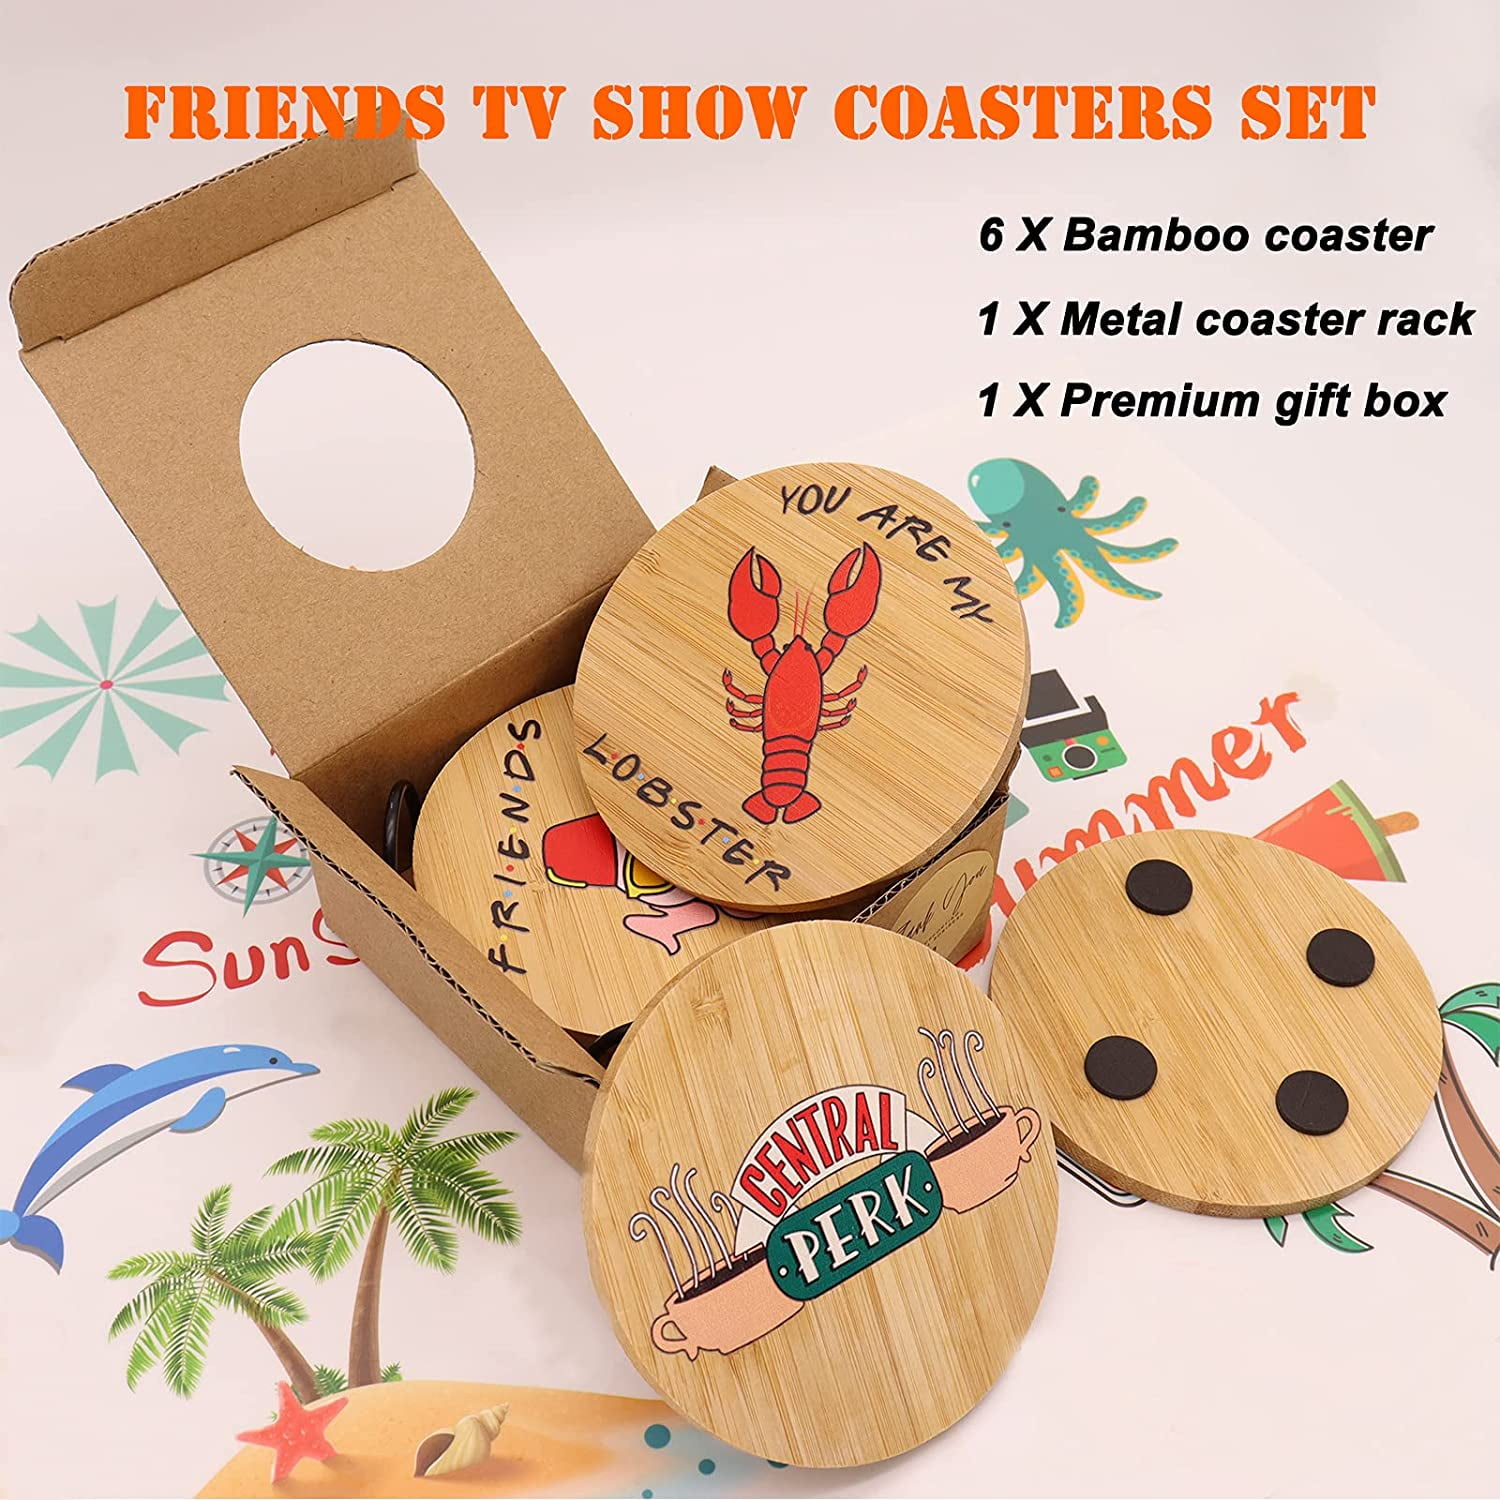 Friends TV Show Gifts Coasters for Drinks,6 Pcs Natural Wooden Round Coaster Set with Holder,Friends TV Show Merchandise for Housewarming Gift,Farmhouse Apartment Bar Decorations 